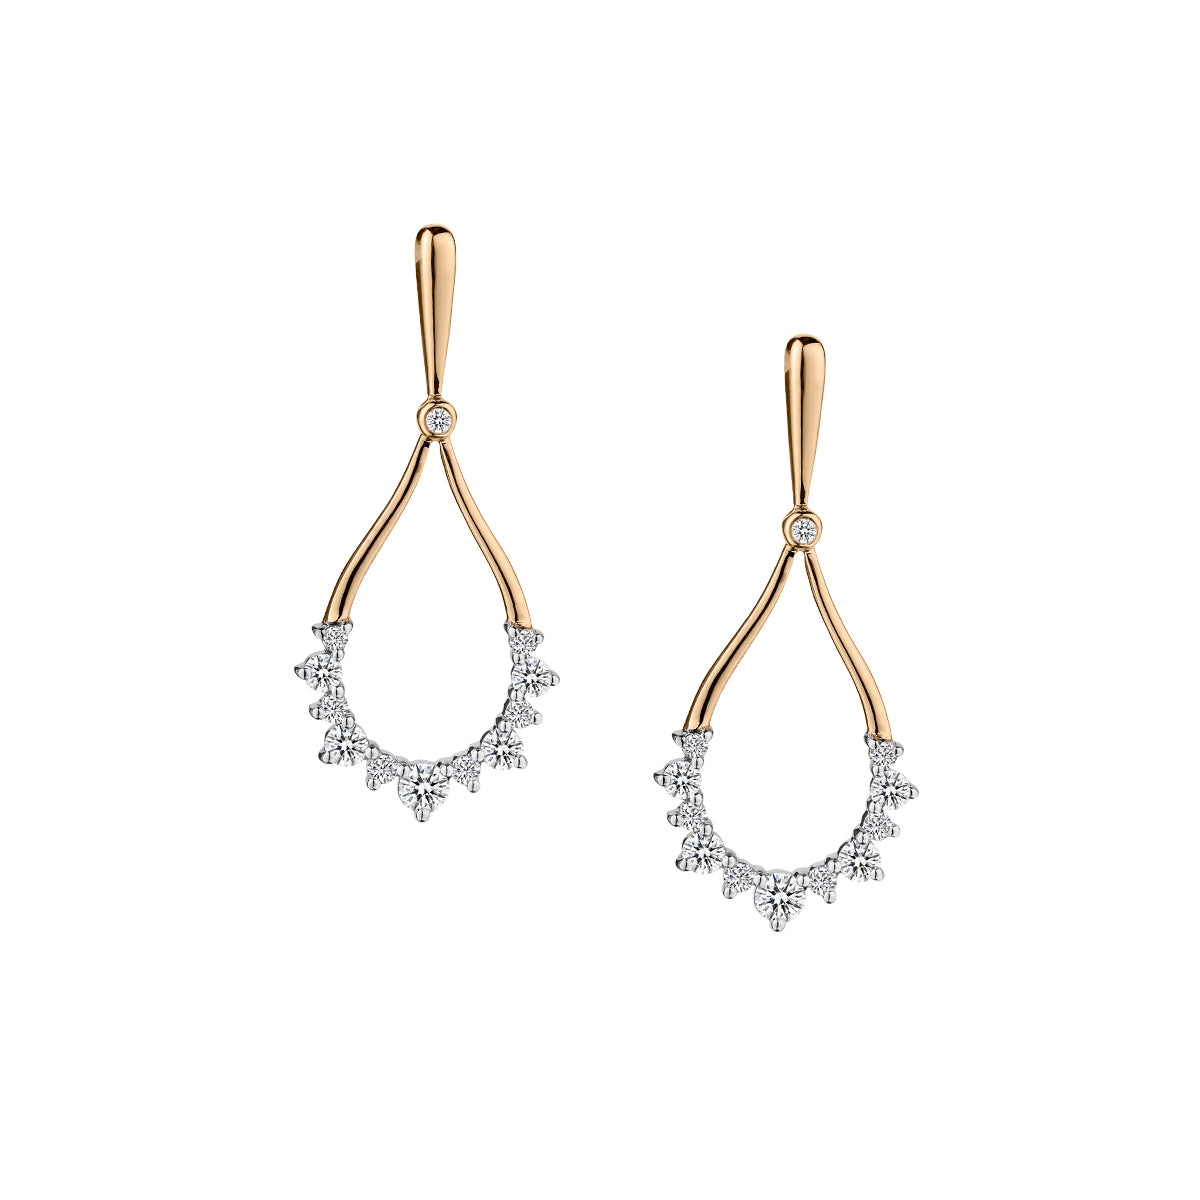 .50 Carat Diamond Drop Earrings, 10kt Yellow Gold and 14kt Yellow Gold Post.......................NOW